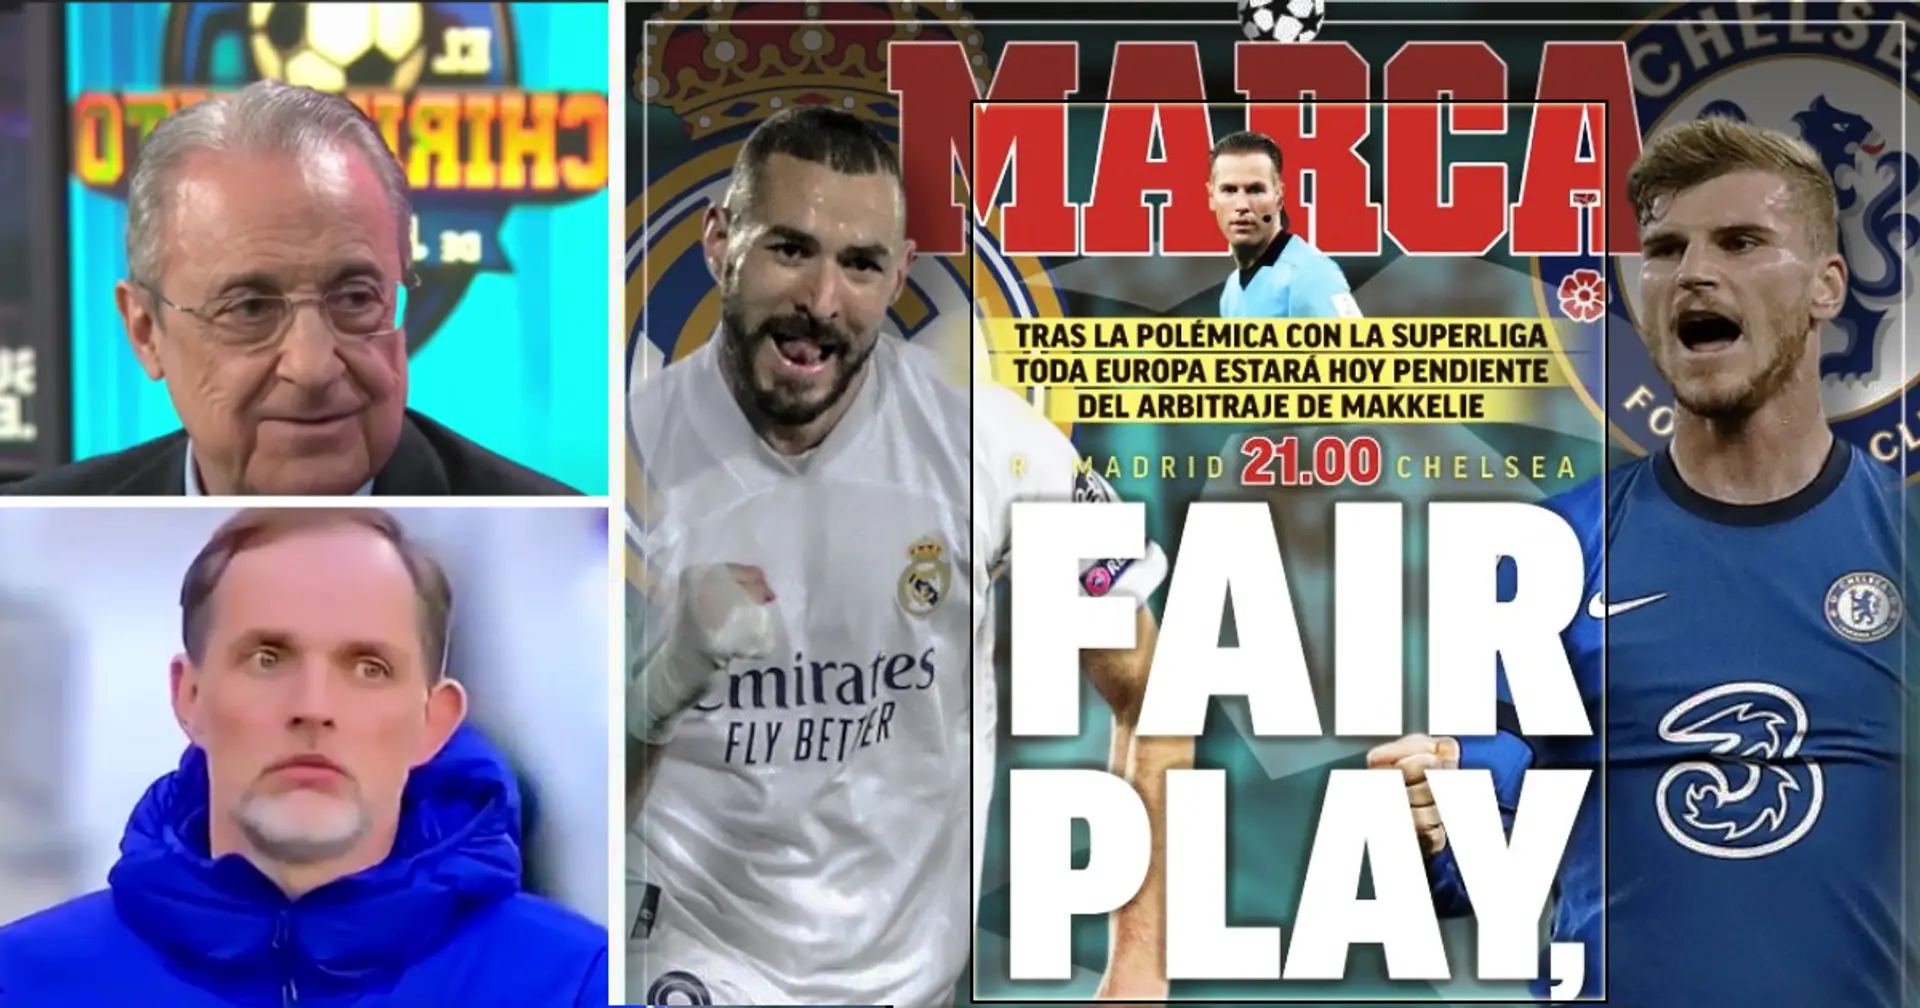 'There'd be 2 penalties to Chelsea': Pro-Madrid Spanish media predict unequal refereeing in Blues' favour